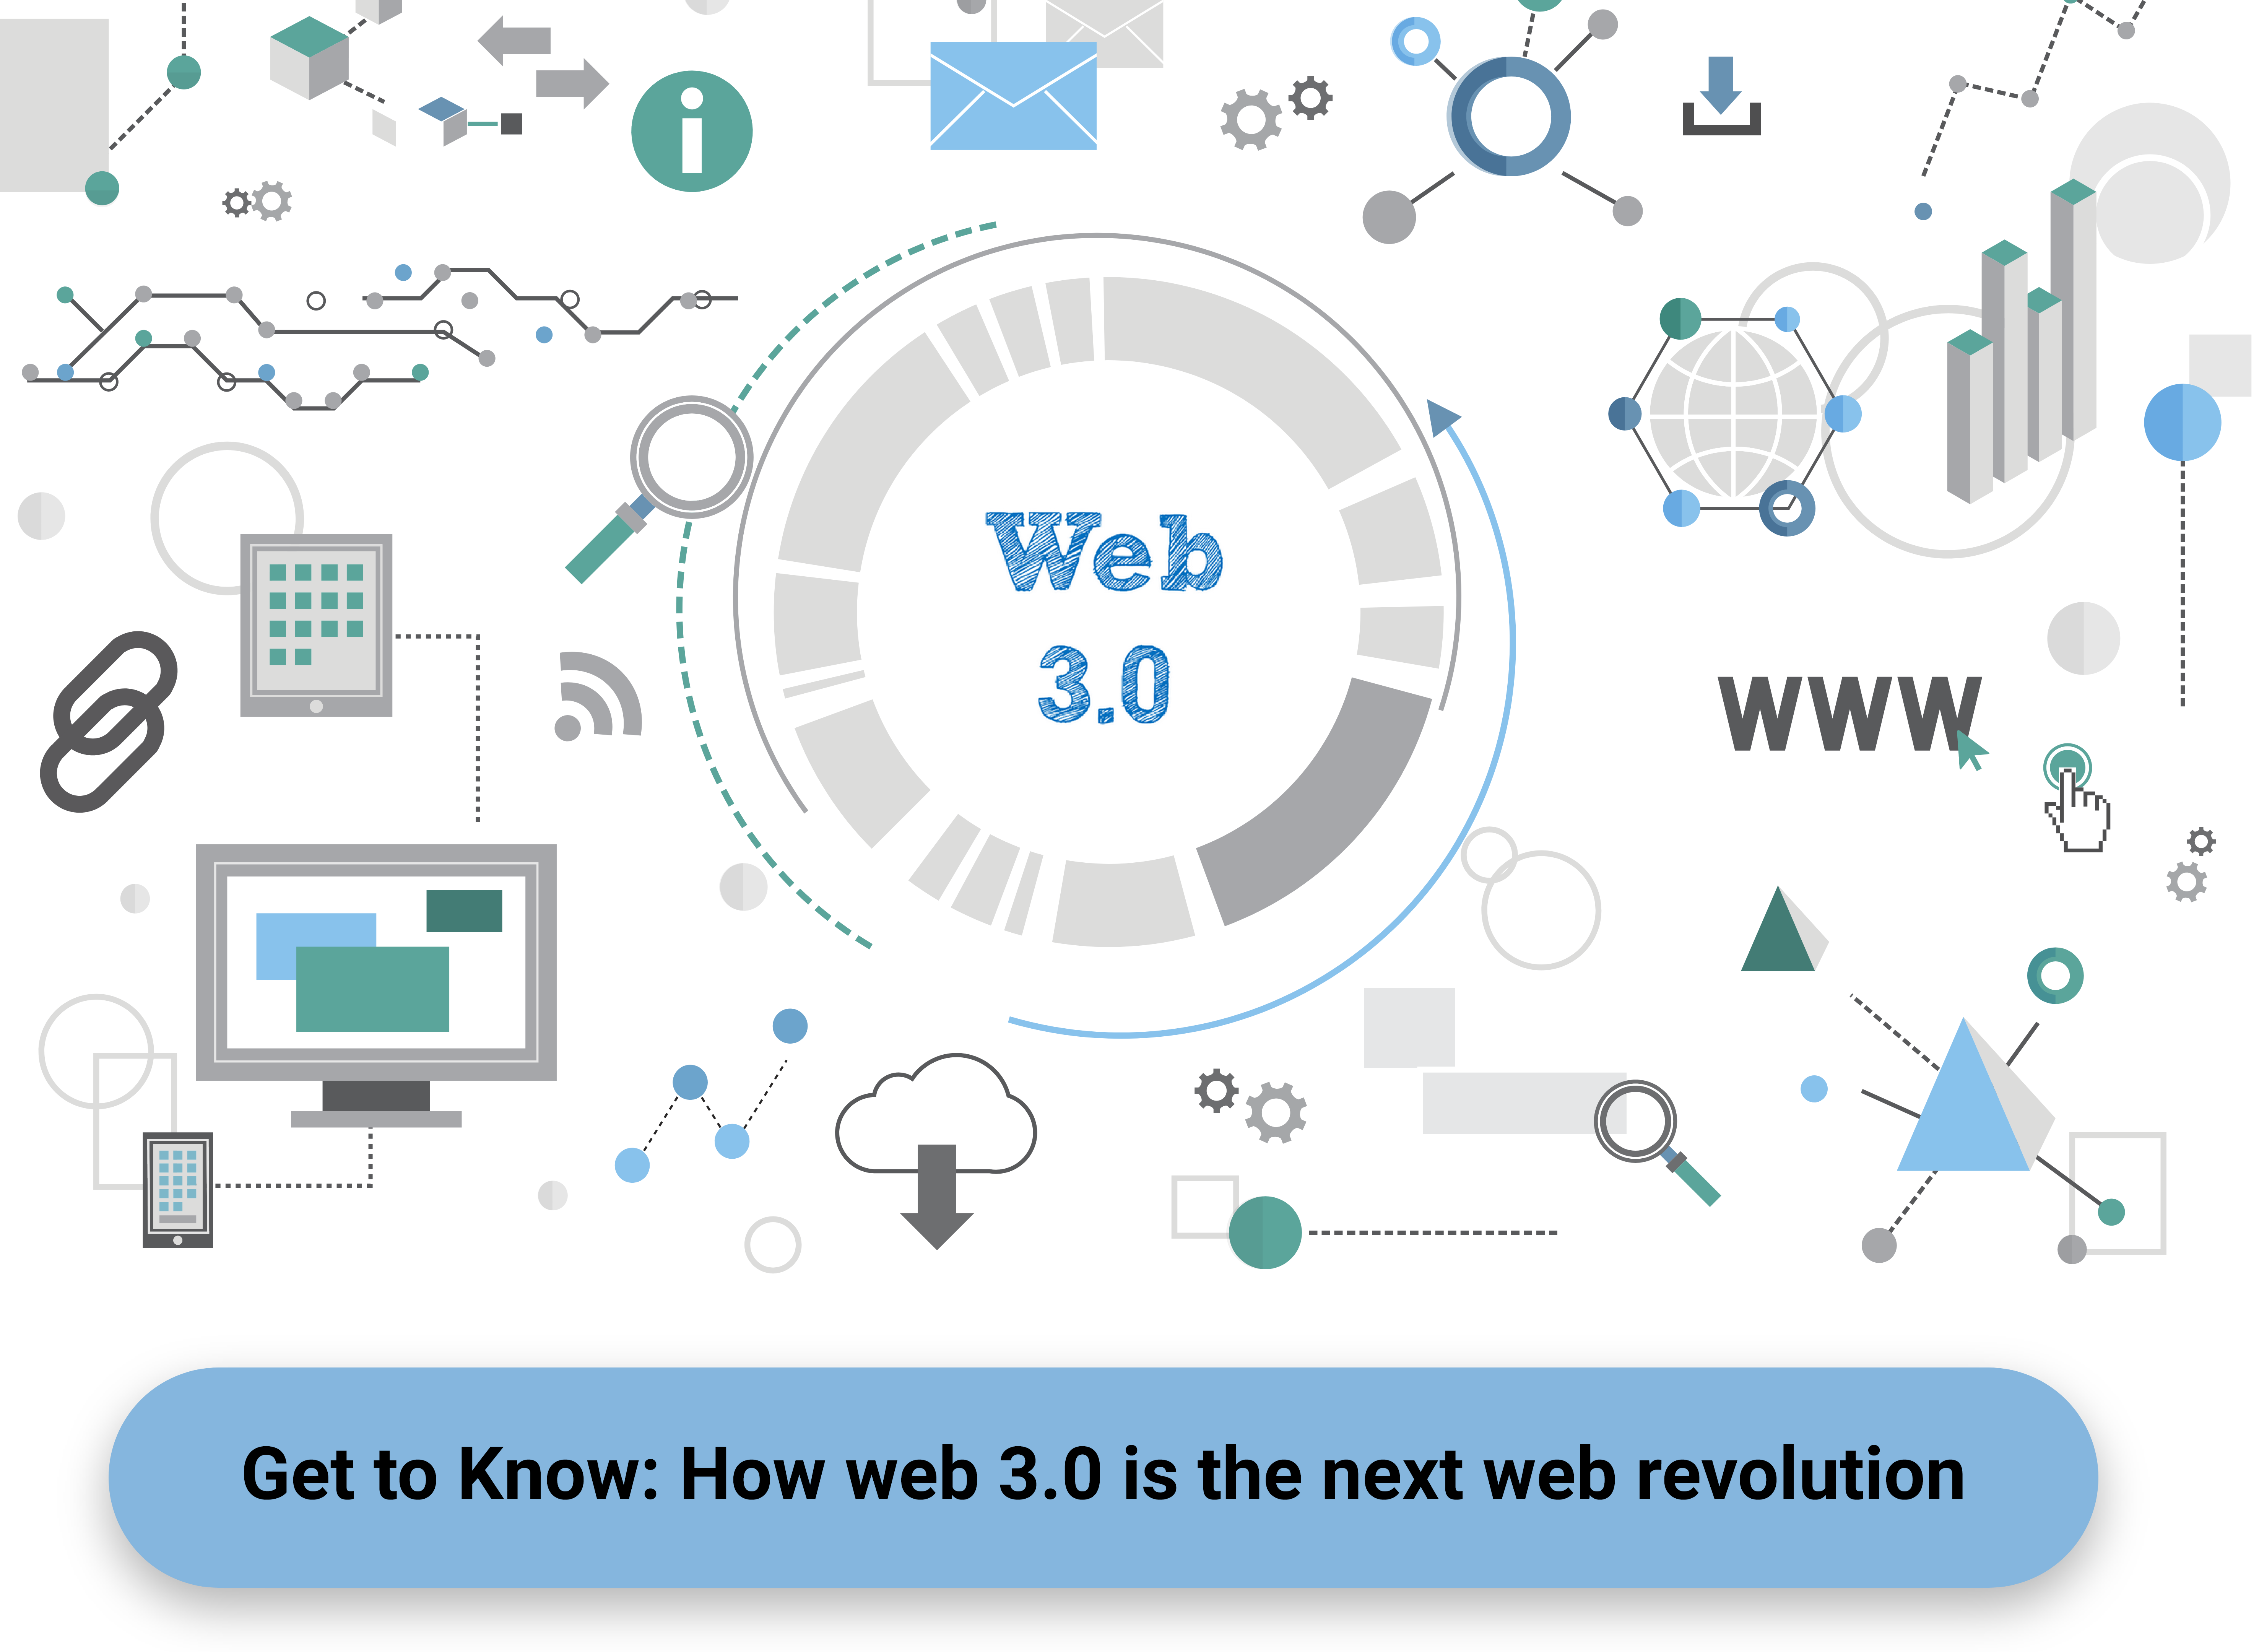 Get to Know: How Web 3.0 is the Next Web Revolution? 